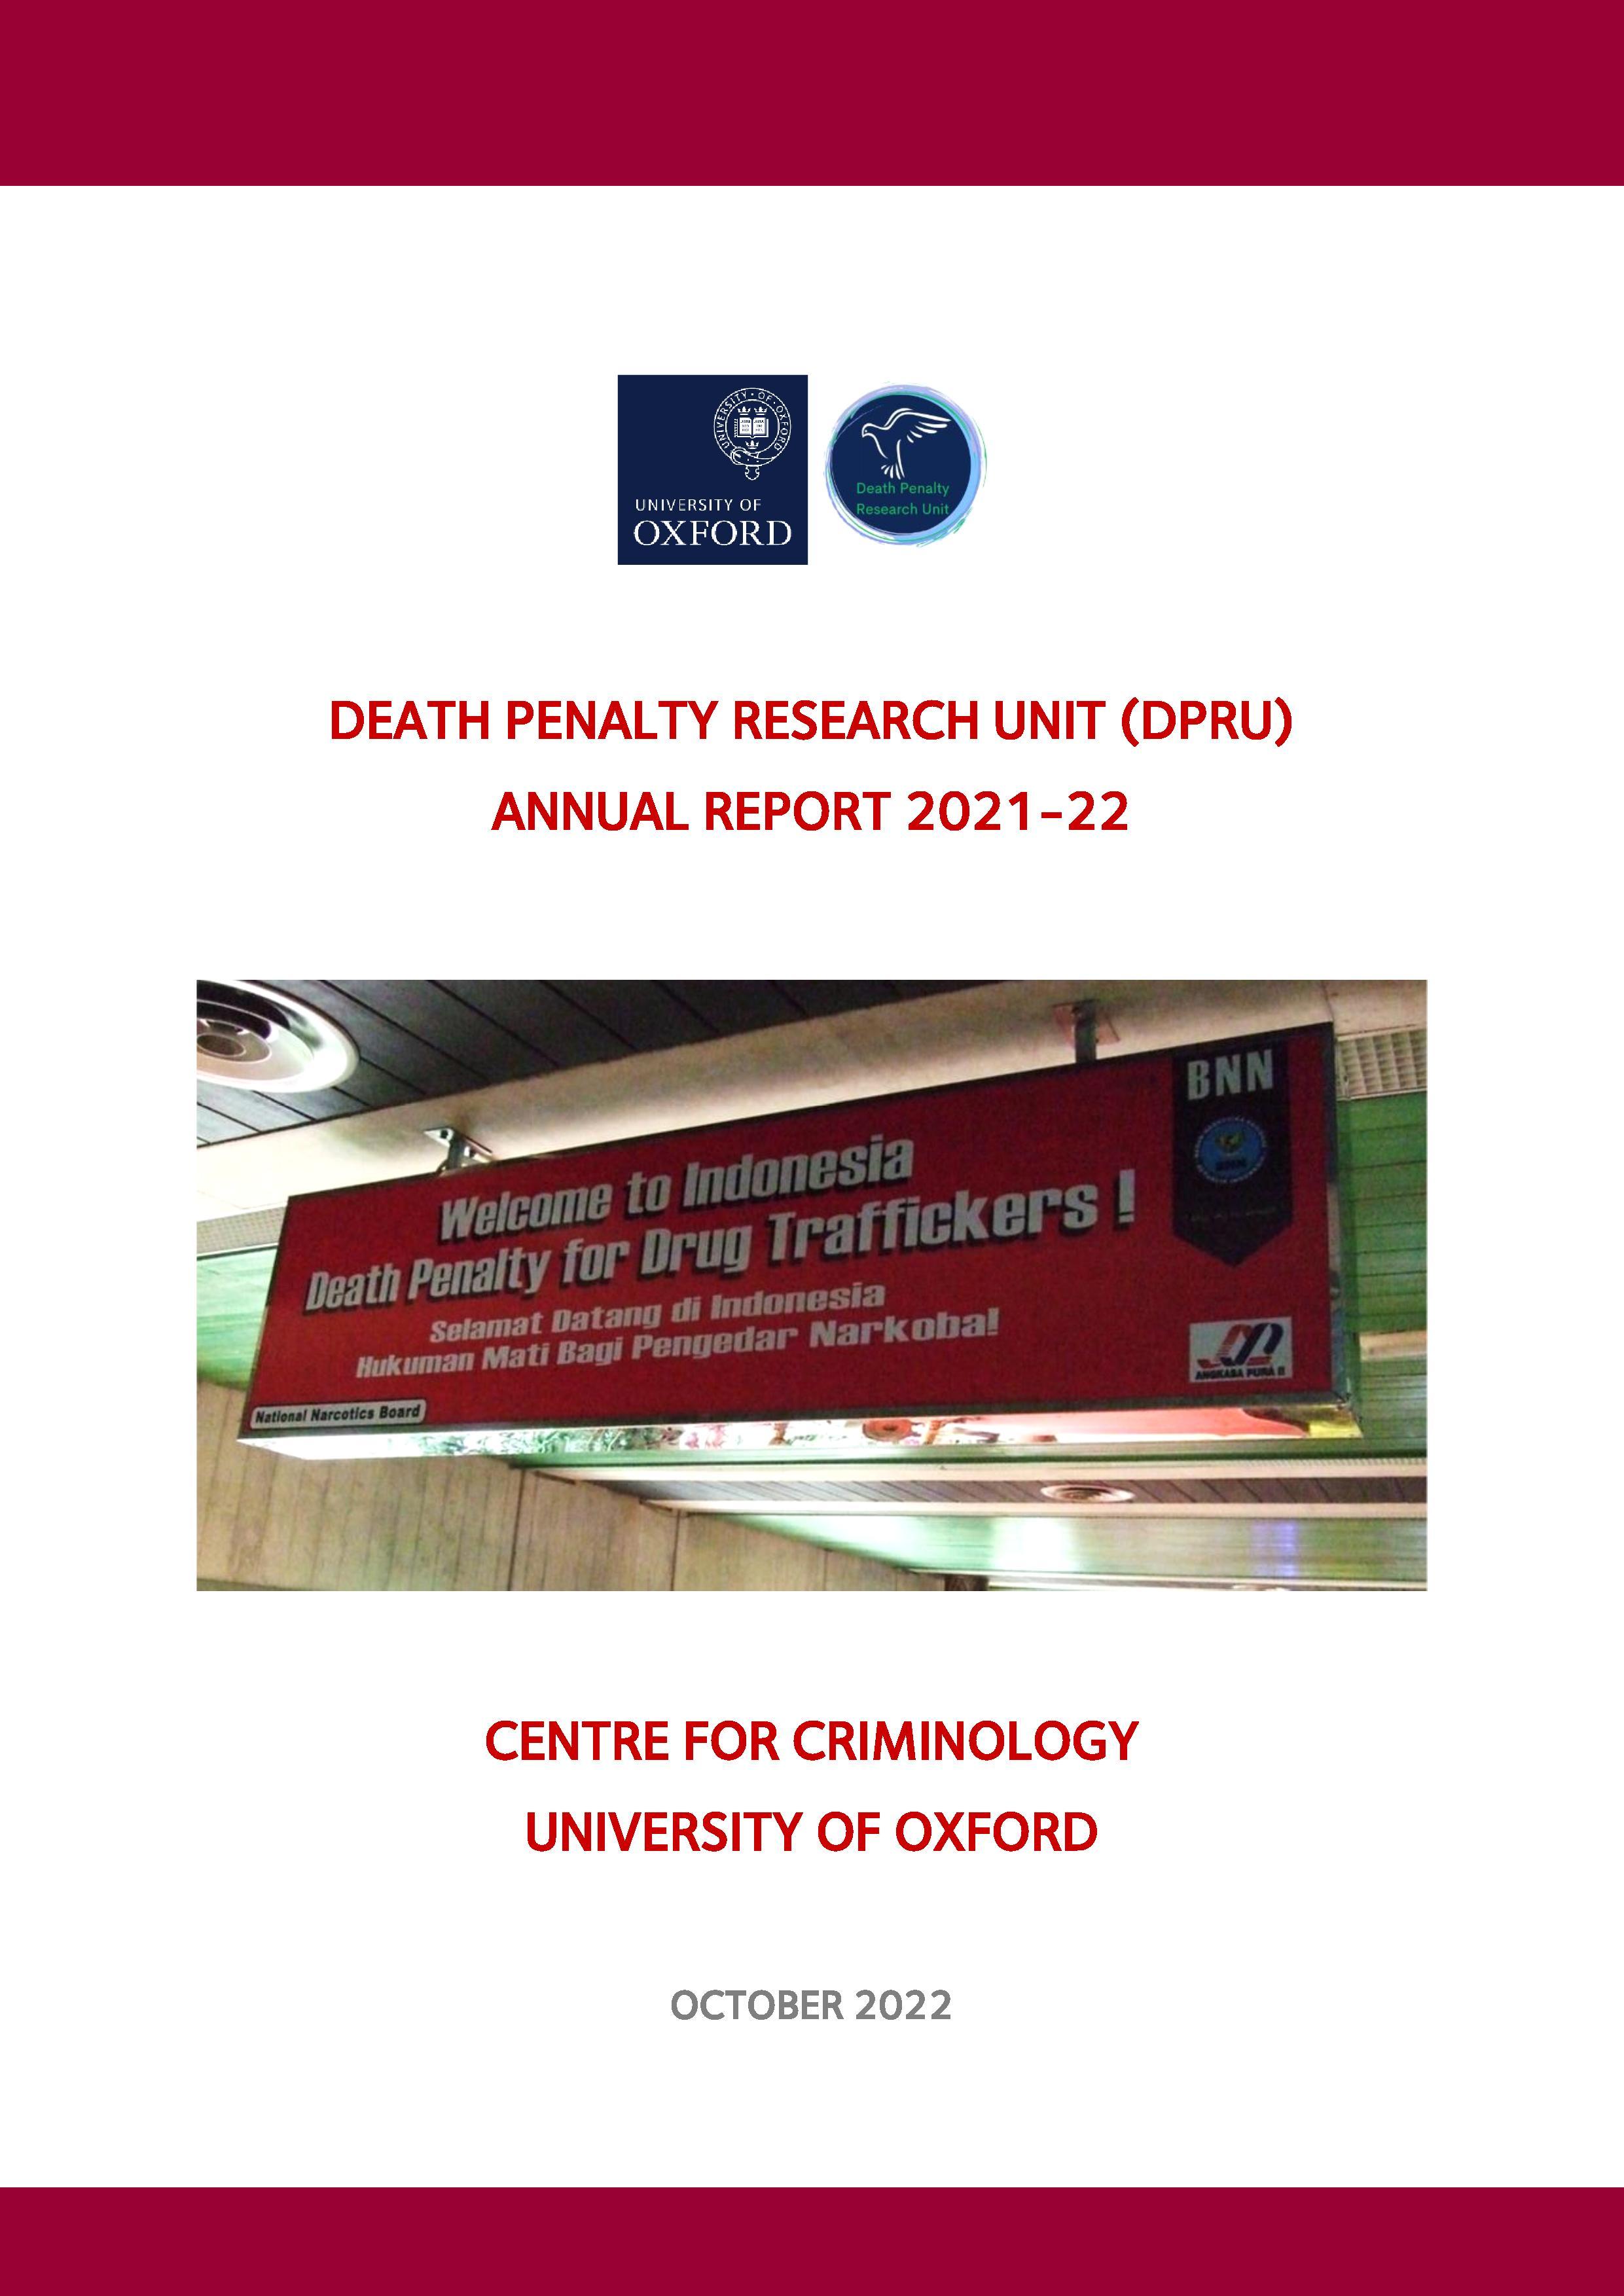 The cover of the DPRU Annual Report 2021-22